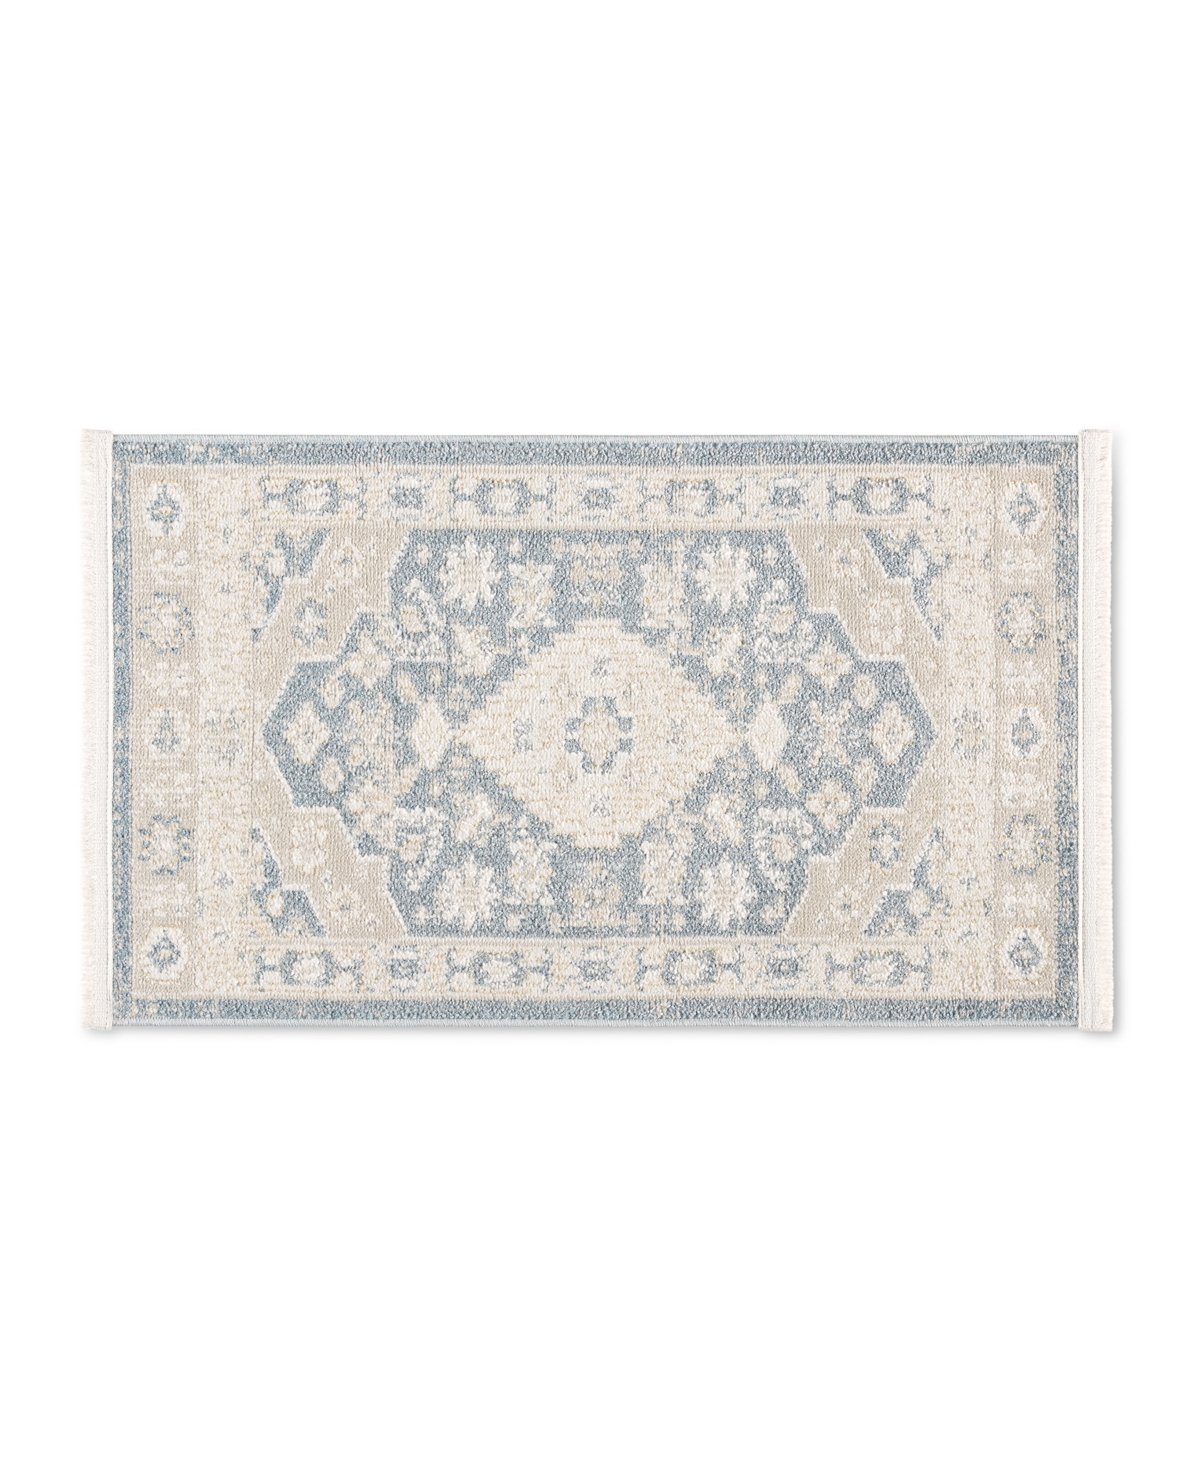 Town & Country Living Everyday Rein Everwash 17 1'9" X 2'11" Area Rug In Blue,beige